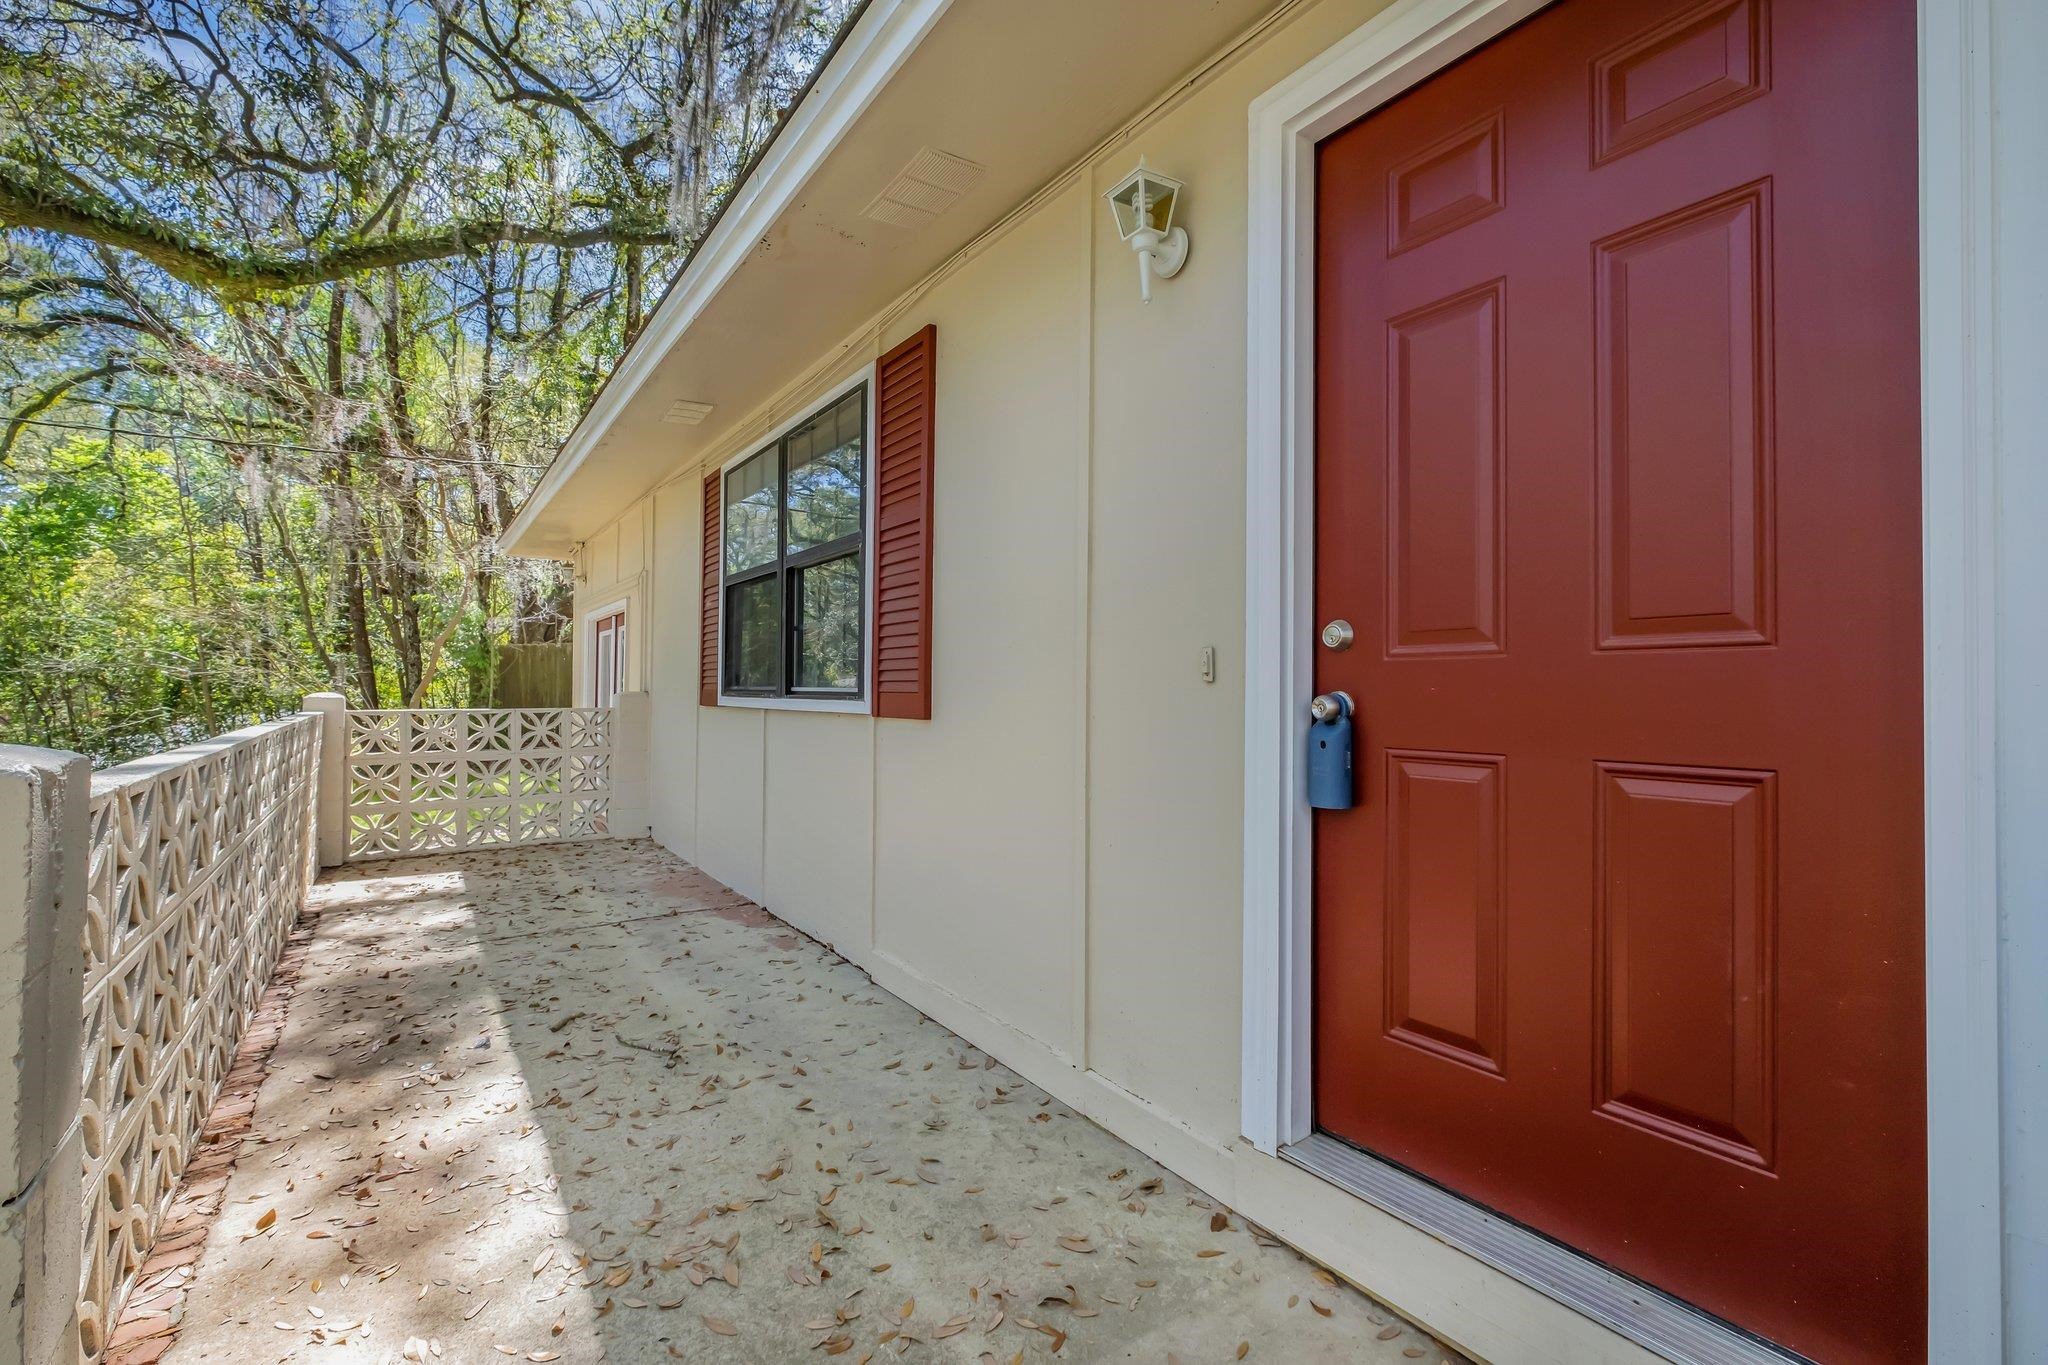 2506 Colleen Drive,TALLAHASSEE,Florida 32303,4 Bedrooms Bedrooms,2 BathroomsBathrooms,Detached single family,2506 Colleen Drive,369522